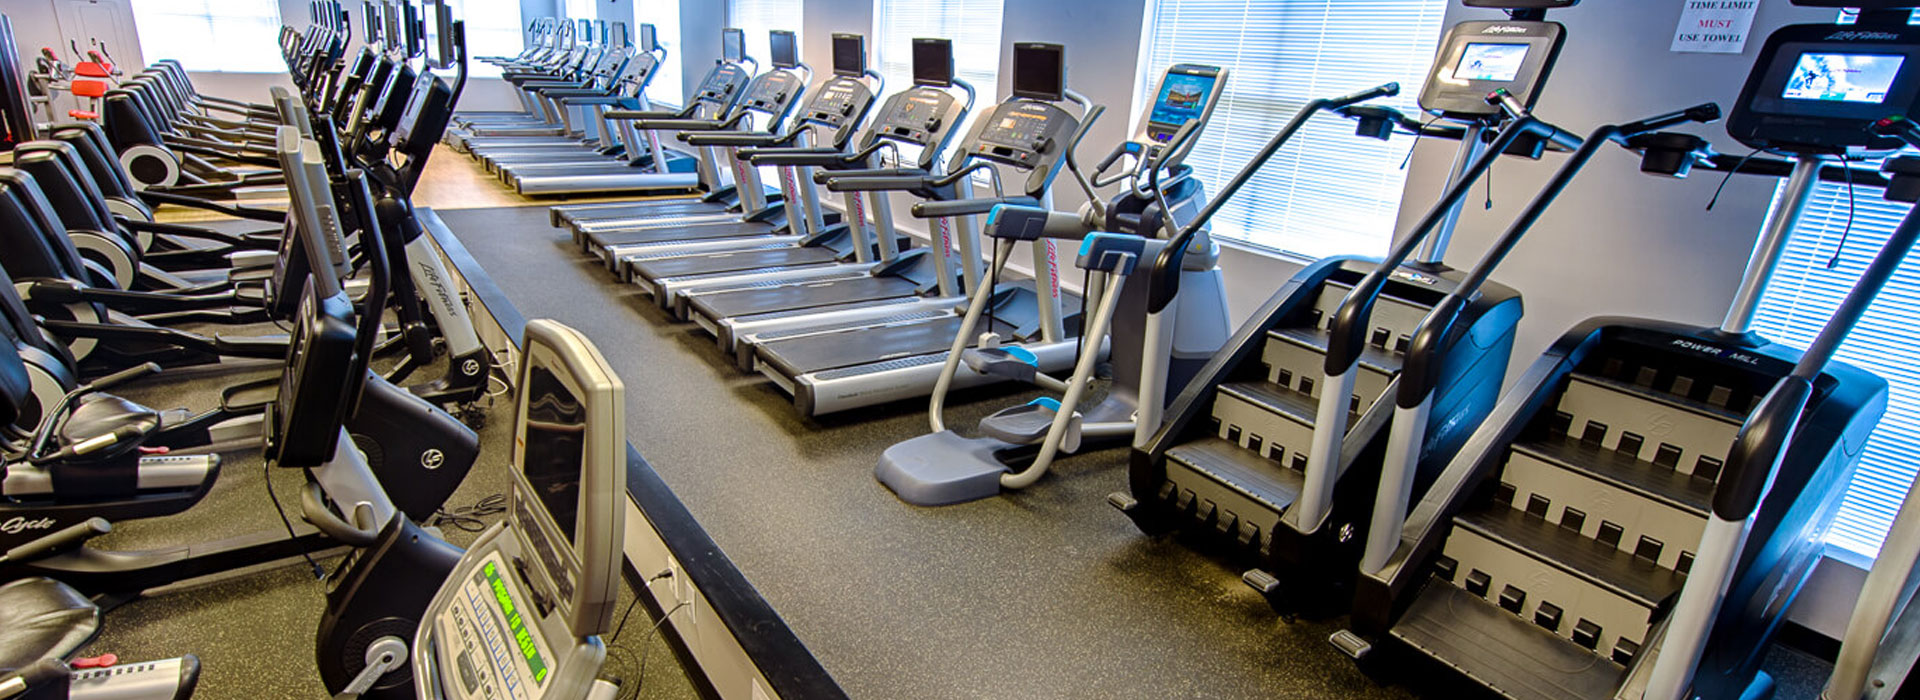 Why Strive Athletic Club Is Ranked One of the Best Gyms In Wesley Chapel